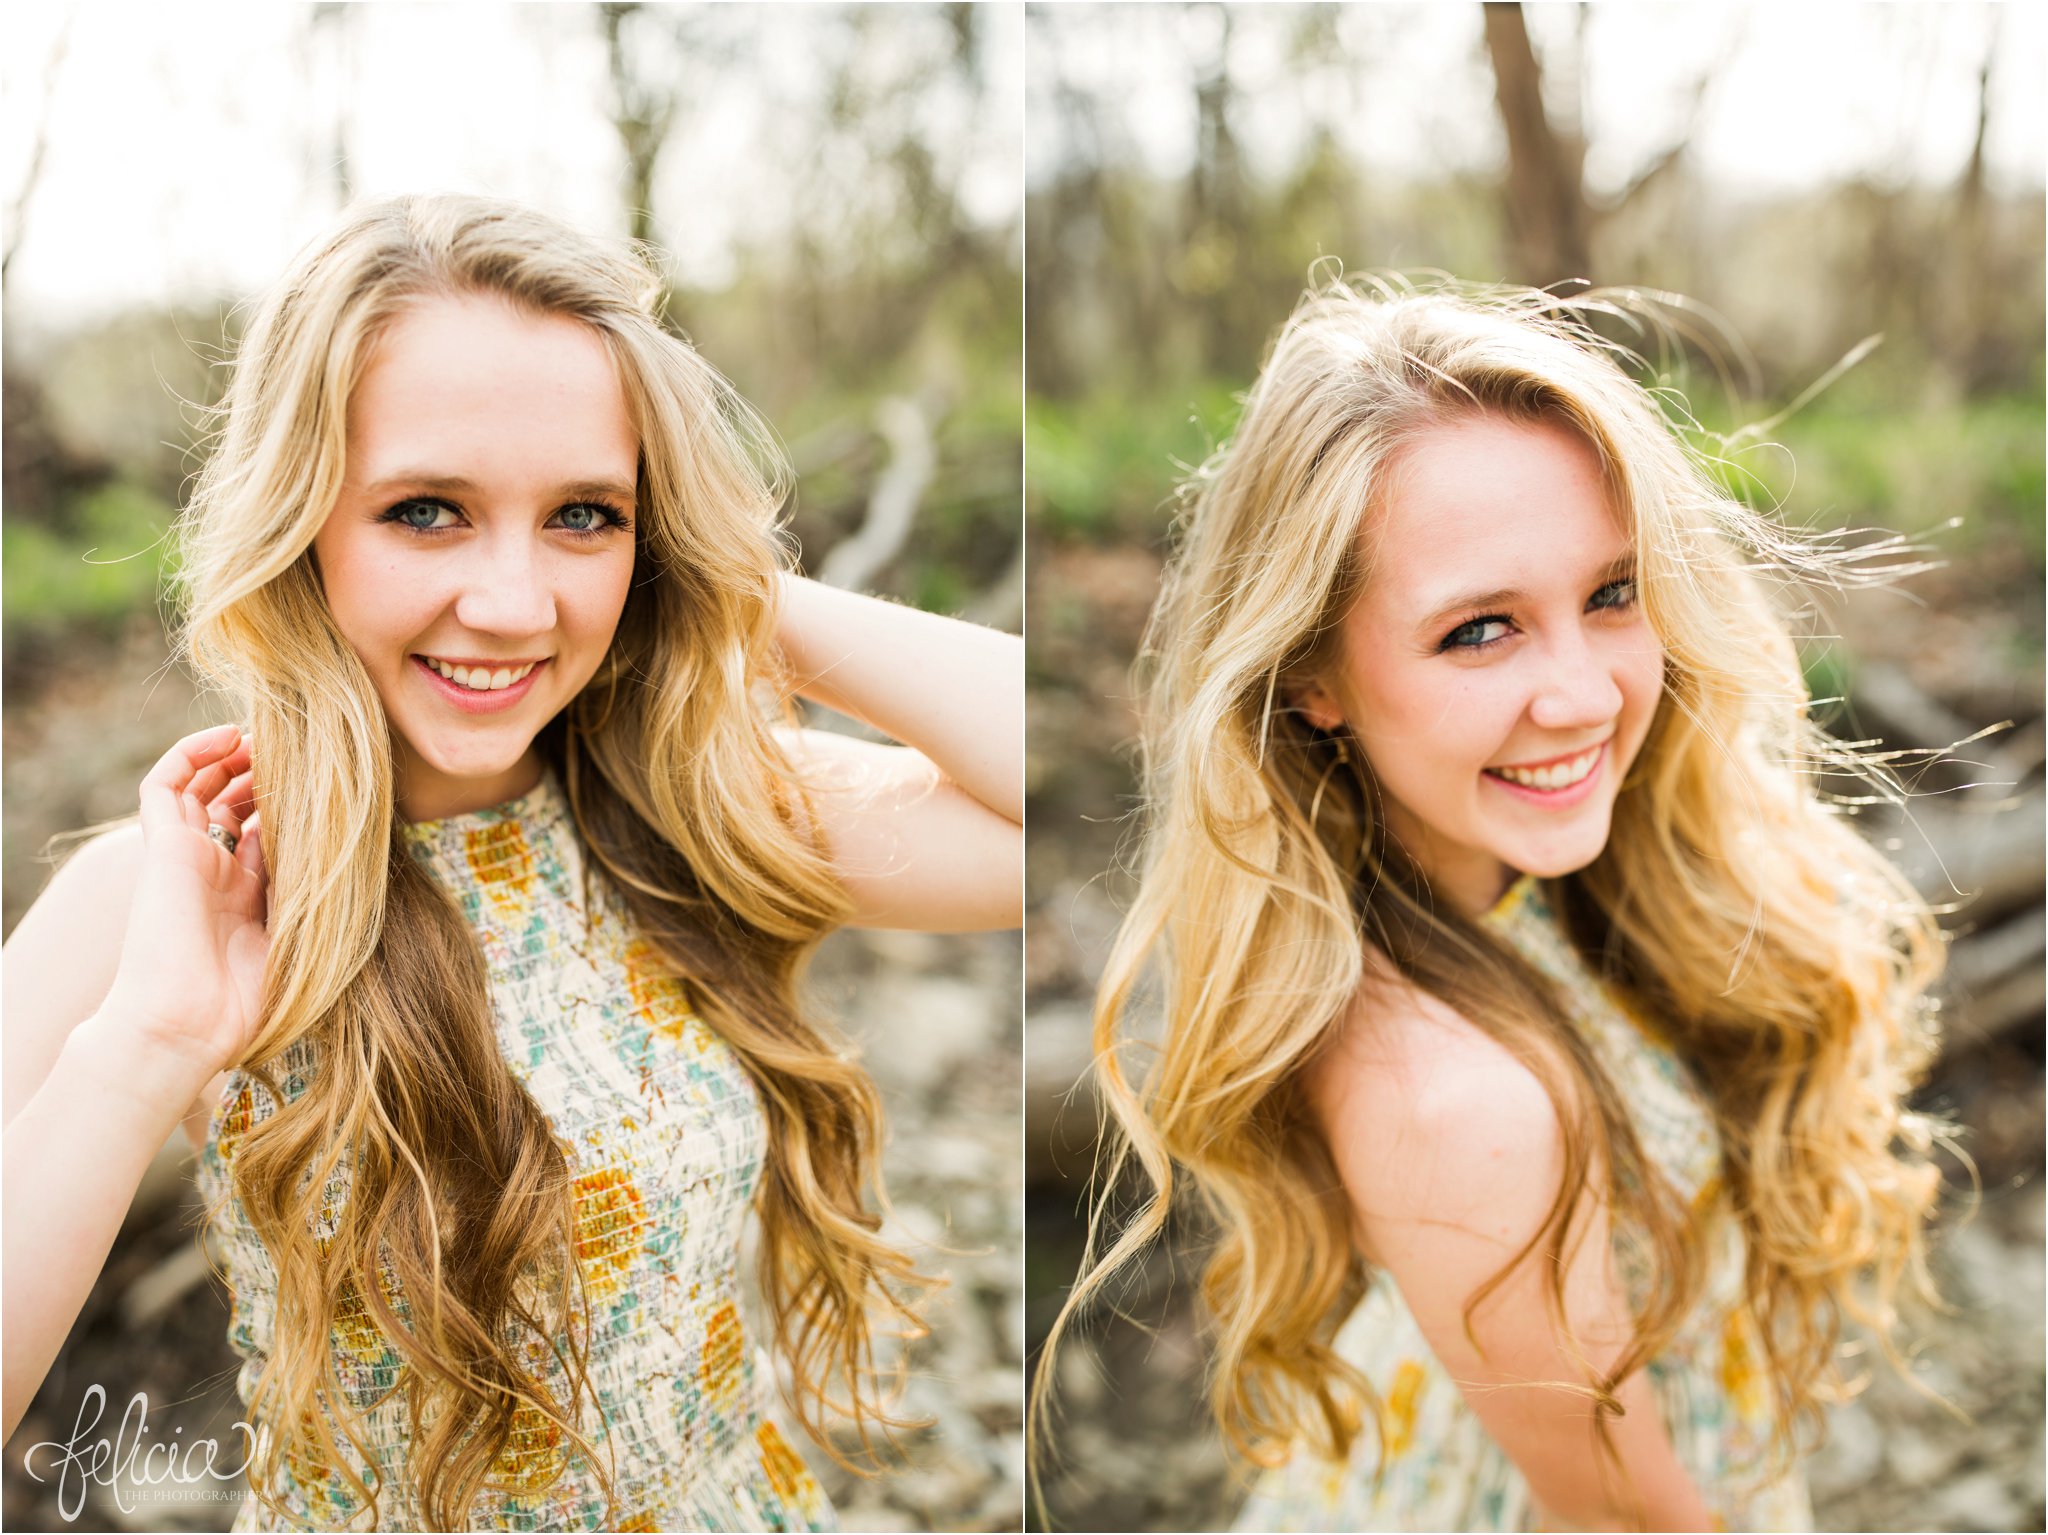 senior pictures | images by feliciathephotographer.com | Kansas City | rustic | blonde | nature background | trees | flower print dress | yellow dress | smiling 